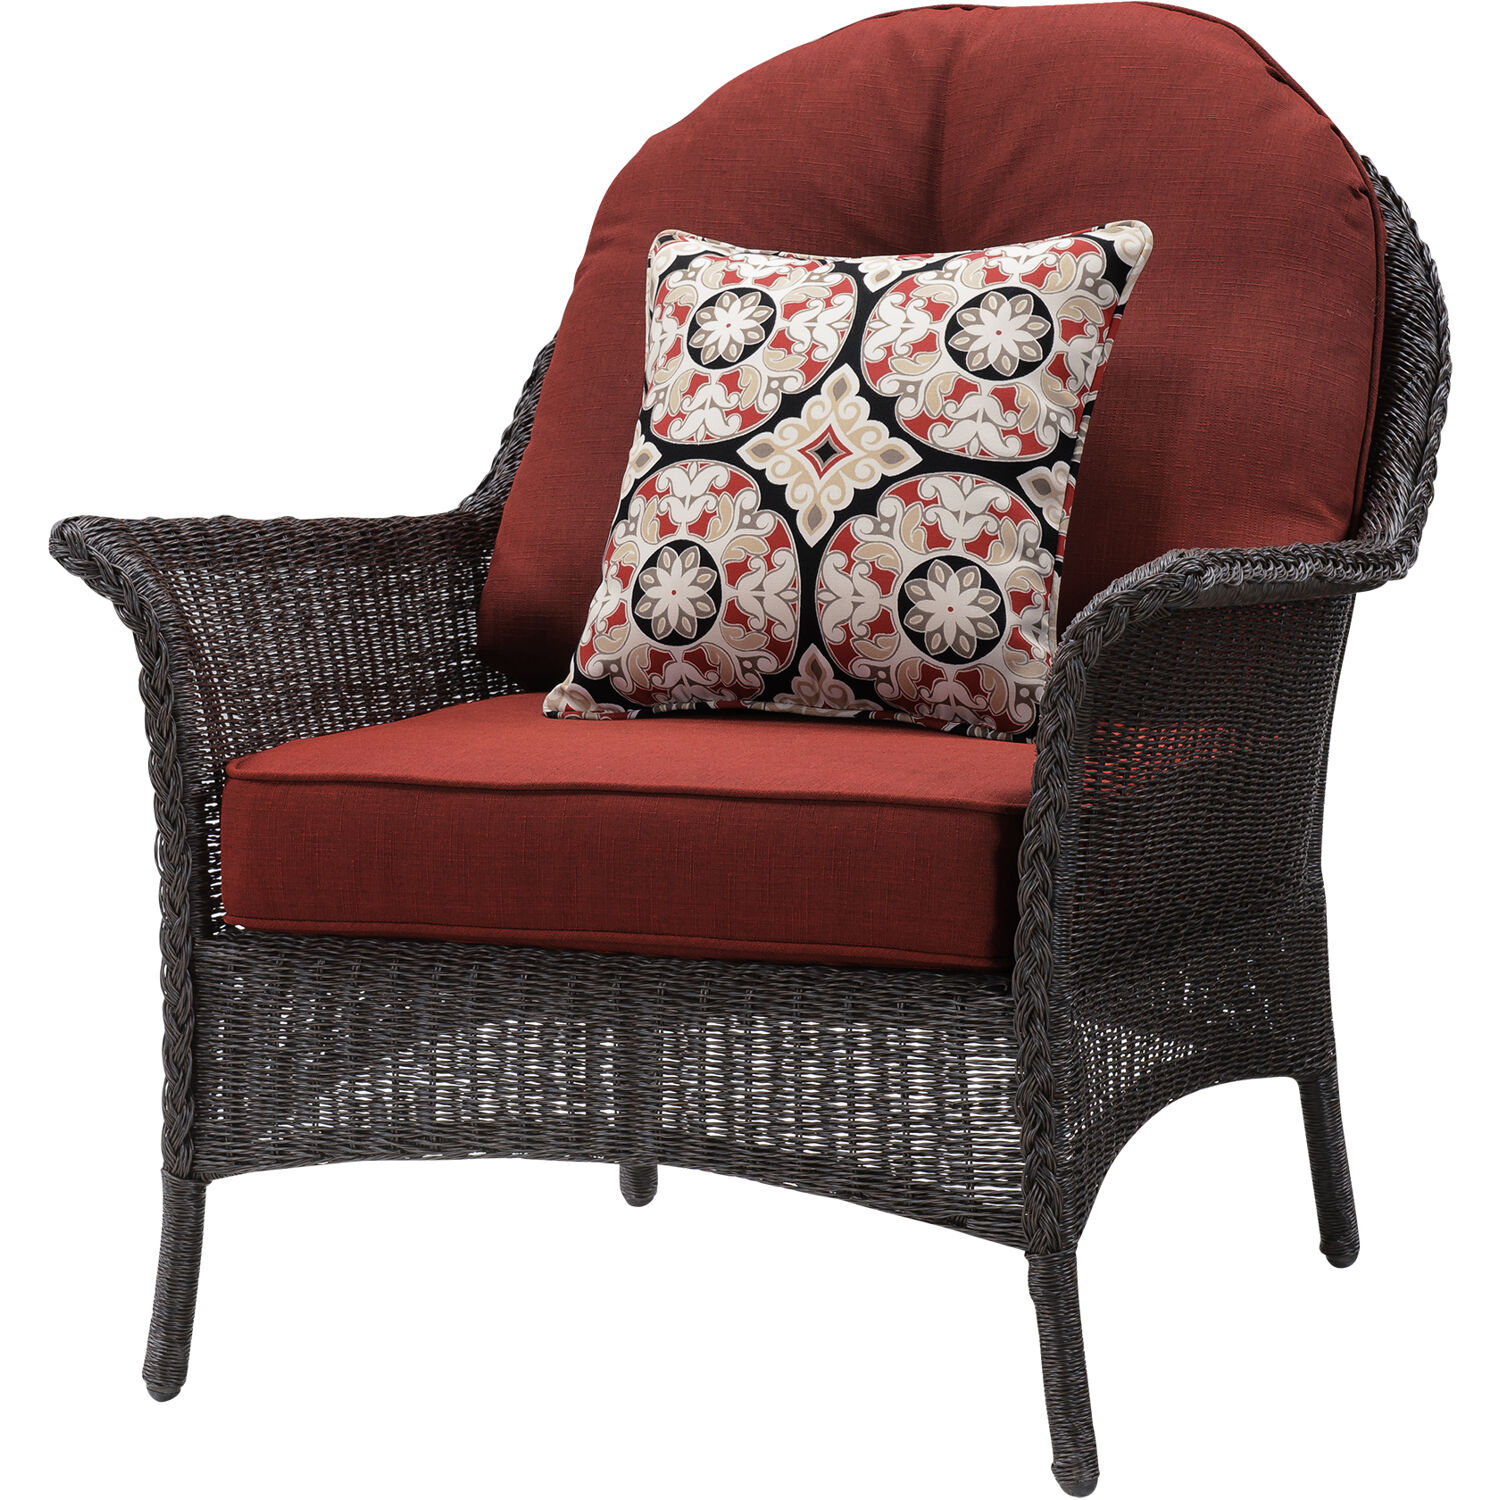 Hanover Sun Porch 4-Piece Resin Lounge Set with Handwoven Loveseat, 2 Armchairs, Coffee Table, and Plush Crimson Red Cushions - image 3 of 10